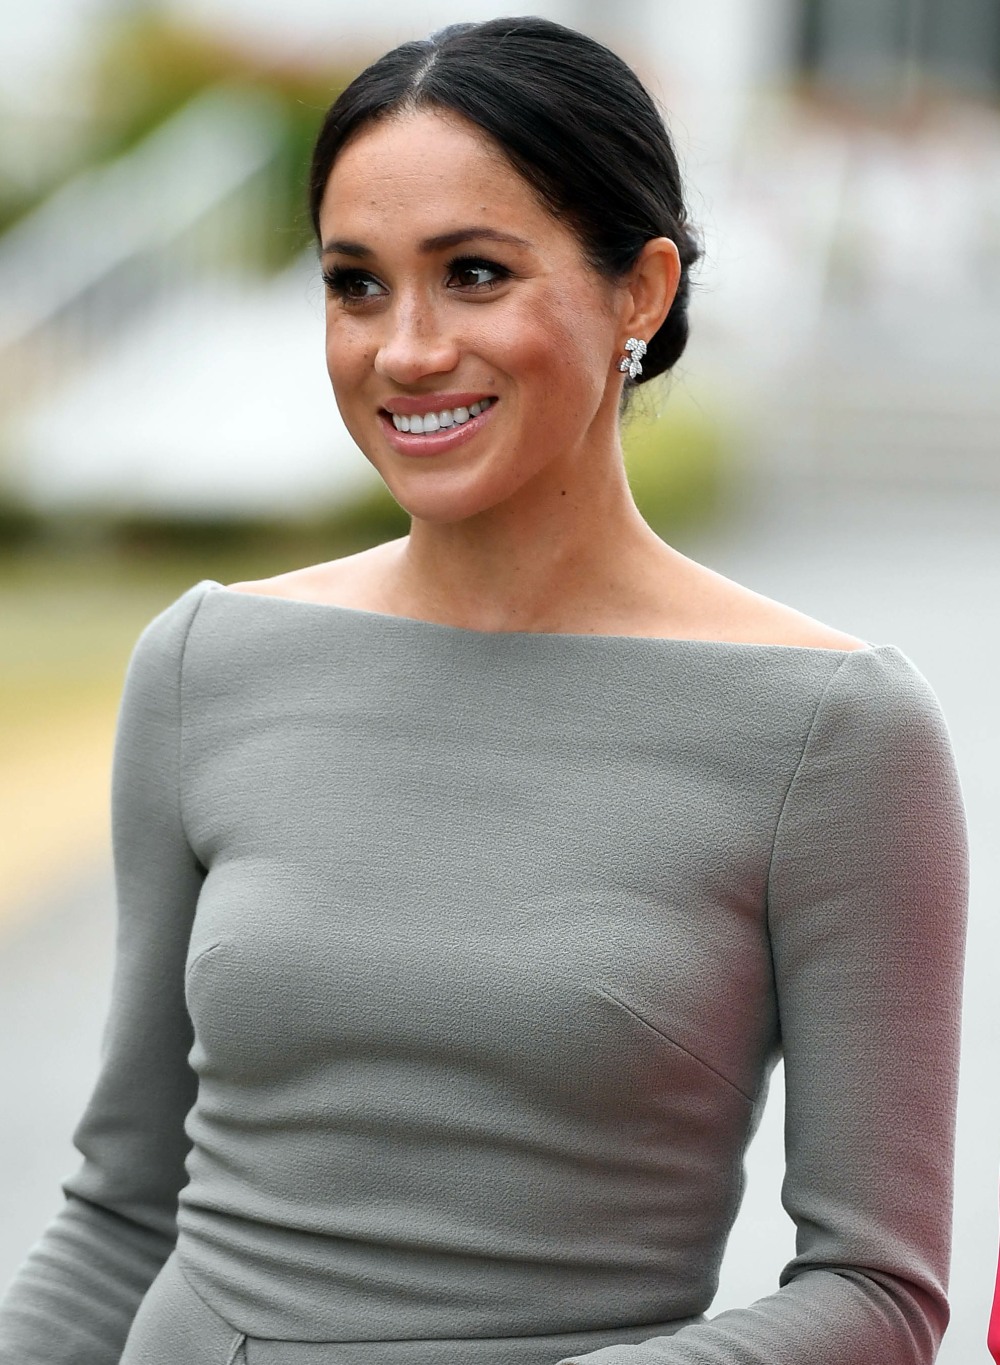 The Duke and Duchess of Sussex in Ireland - Day 2